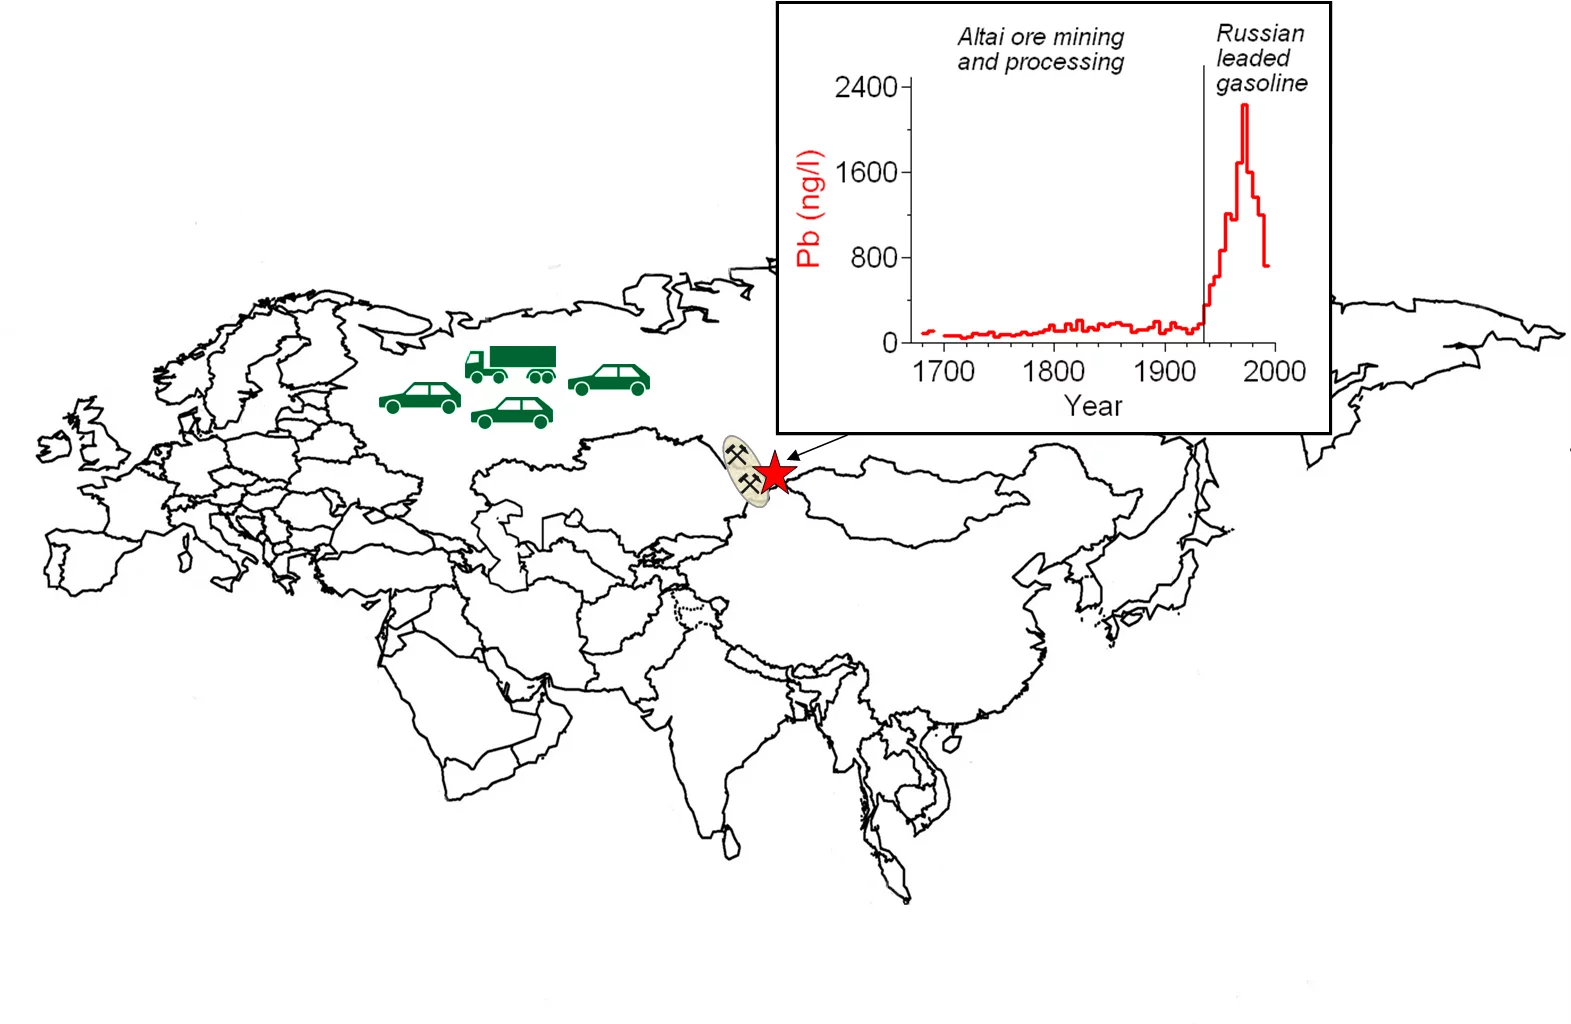 Atmospheric lead concentrations in the period 1680-1995 reconstructed using an ice core from the Belukha glacier in the Siberian Altai. While lead was mainly emitted into the atmosphere from mining in the Altai for the production of Russian coins in the period 1680-1935, Russian leaded gasoline was the major lead source since the 1930s.